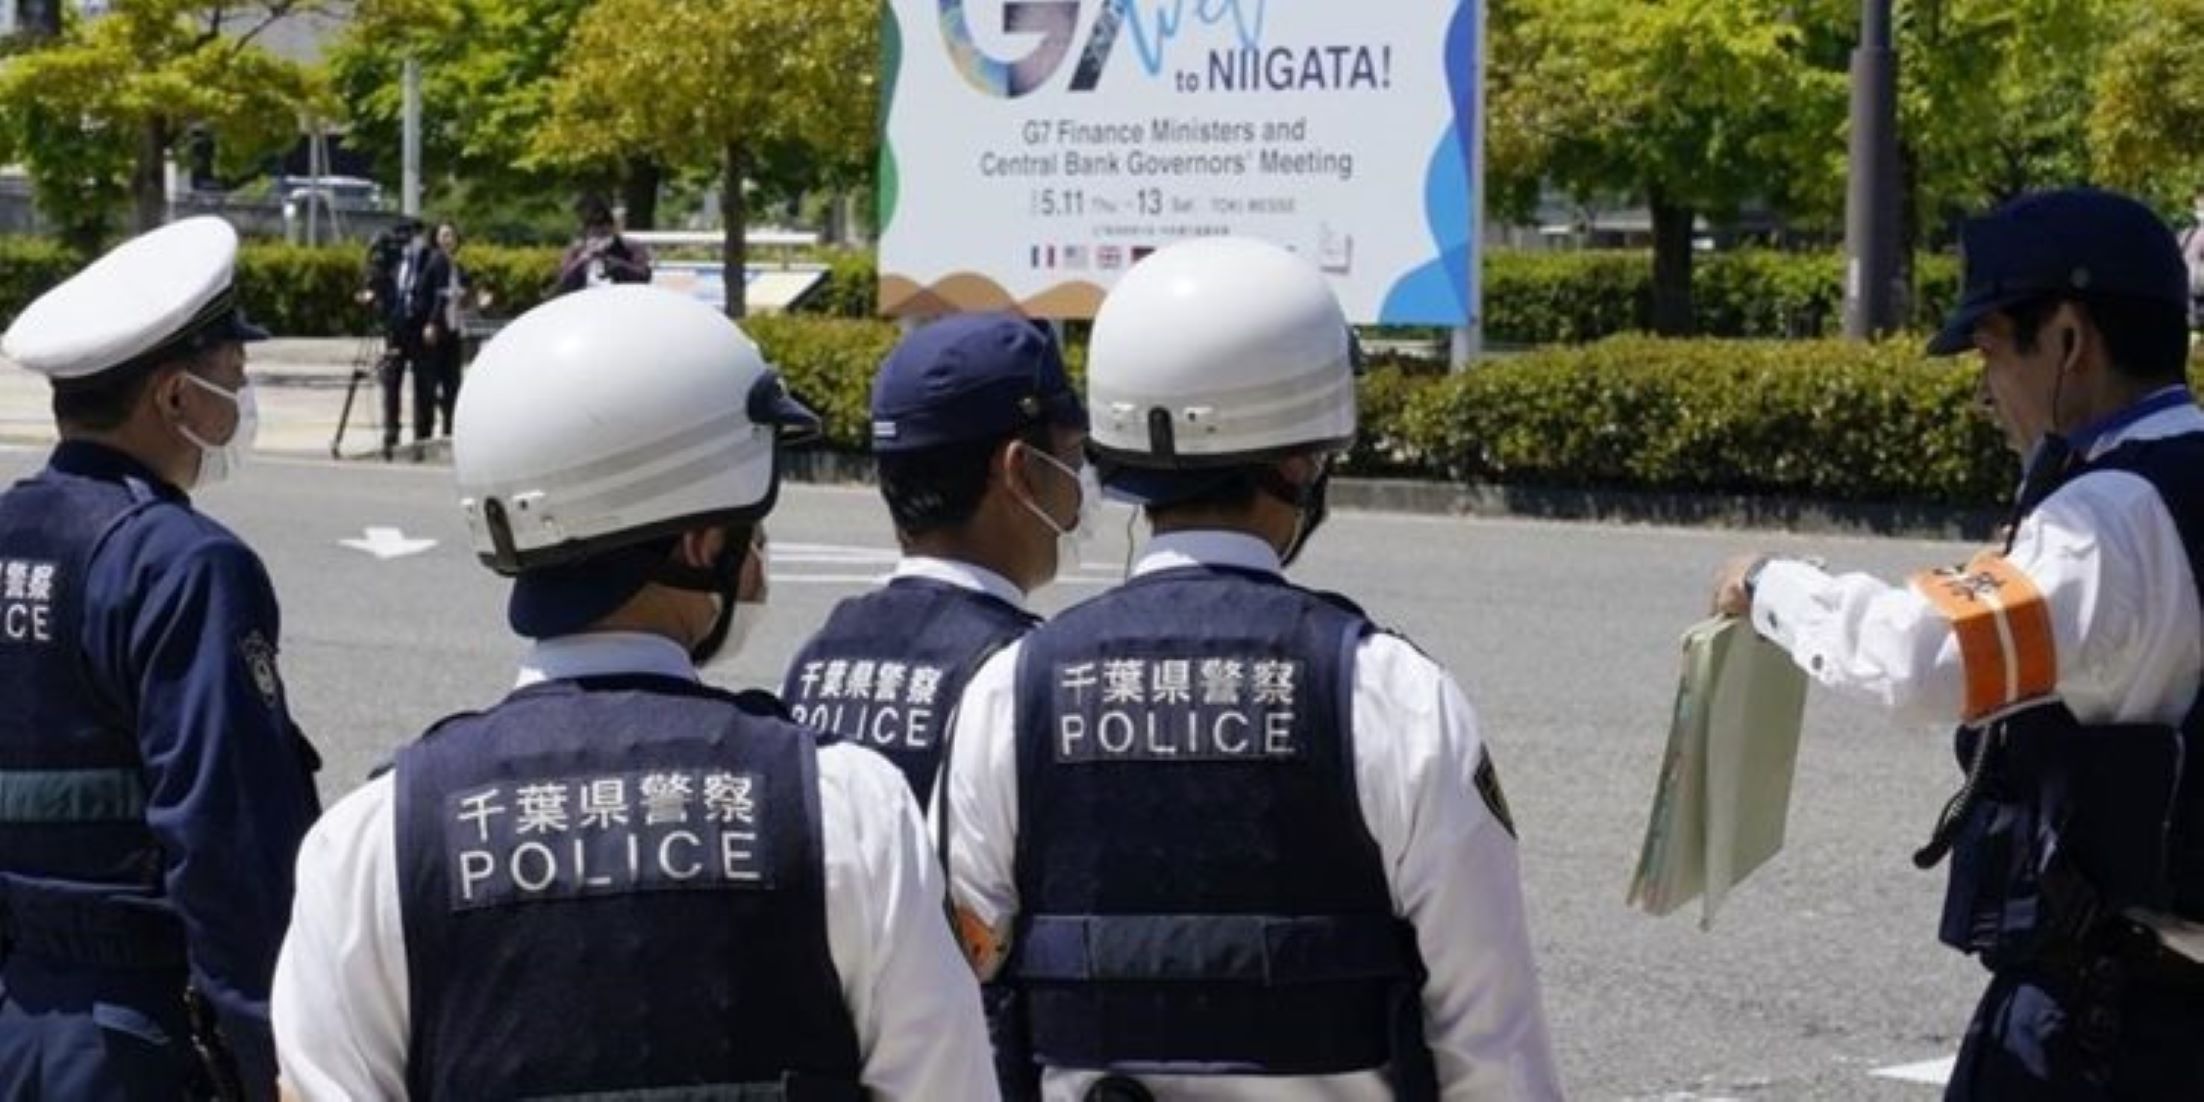 Japan To Deploy Up To 24,000 Security Personnel For Upcoming G7 Summit